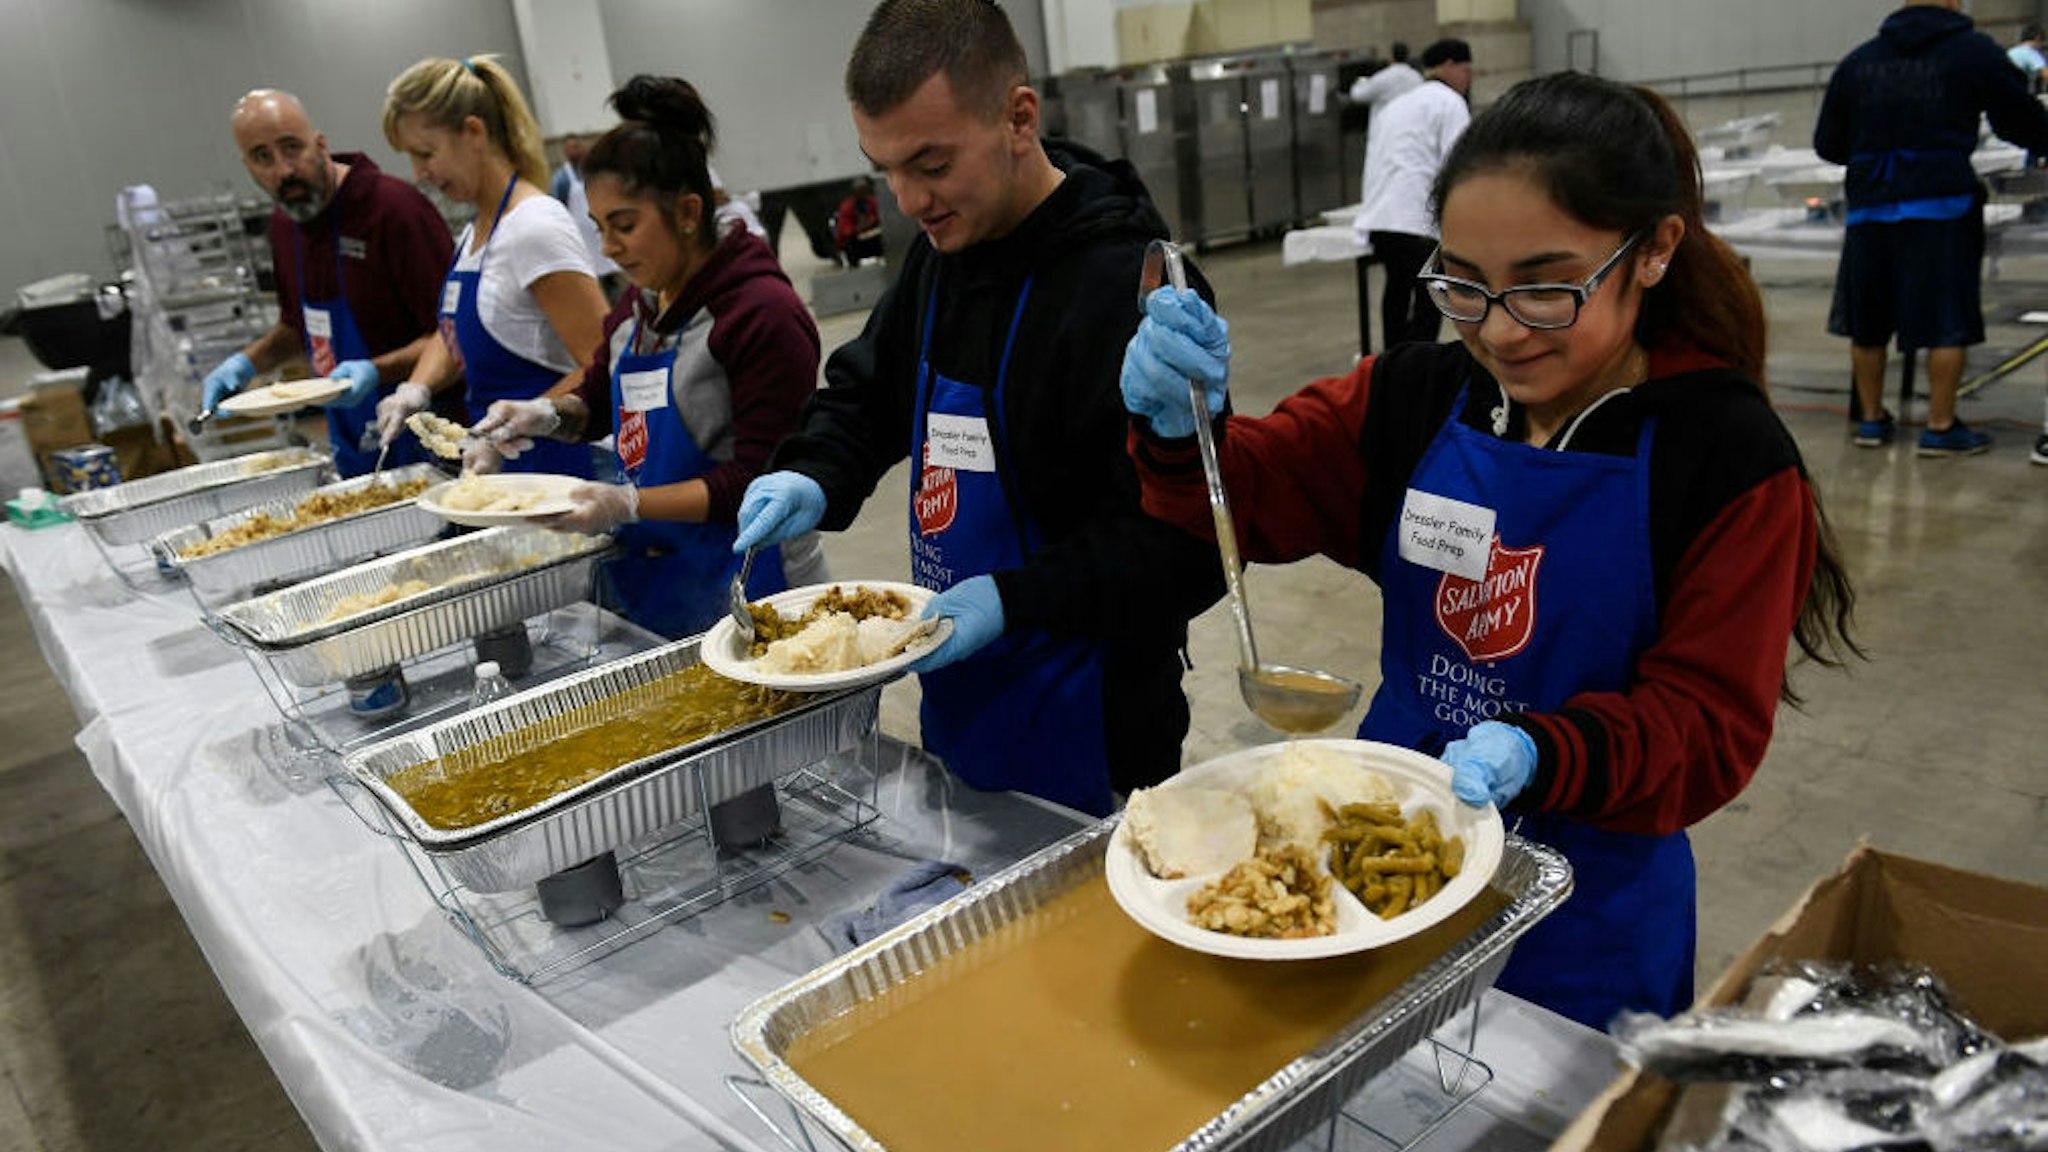 DENVER, CO - NOVEMBER 23 - Volunteers help serve food at the Thanksgiving day feast inside Exhibit Hall B at the Colorado Convention Center on November 23, 2017 in Denver, Colorado. The feast was sponsored by The Salvation Army as it continues its annual tradition of hosting Denvers Community Thanksgiving Meal. Over 150 volunteers helped to serve over 7,000 pounds of food to the homeless and needy. All of the food was donated by King Soopers and City Market. The warm traditional meal consisted of roasted turkey, mashed potatoes, string beans accompanied, rolls and delicious pies. The food was prepared by the Denver Sheriff's department, Denver Broncos' Athletes and the Salvation Army staff and volunteers.